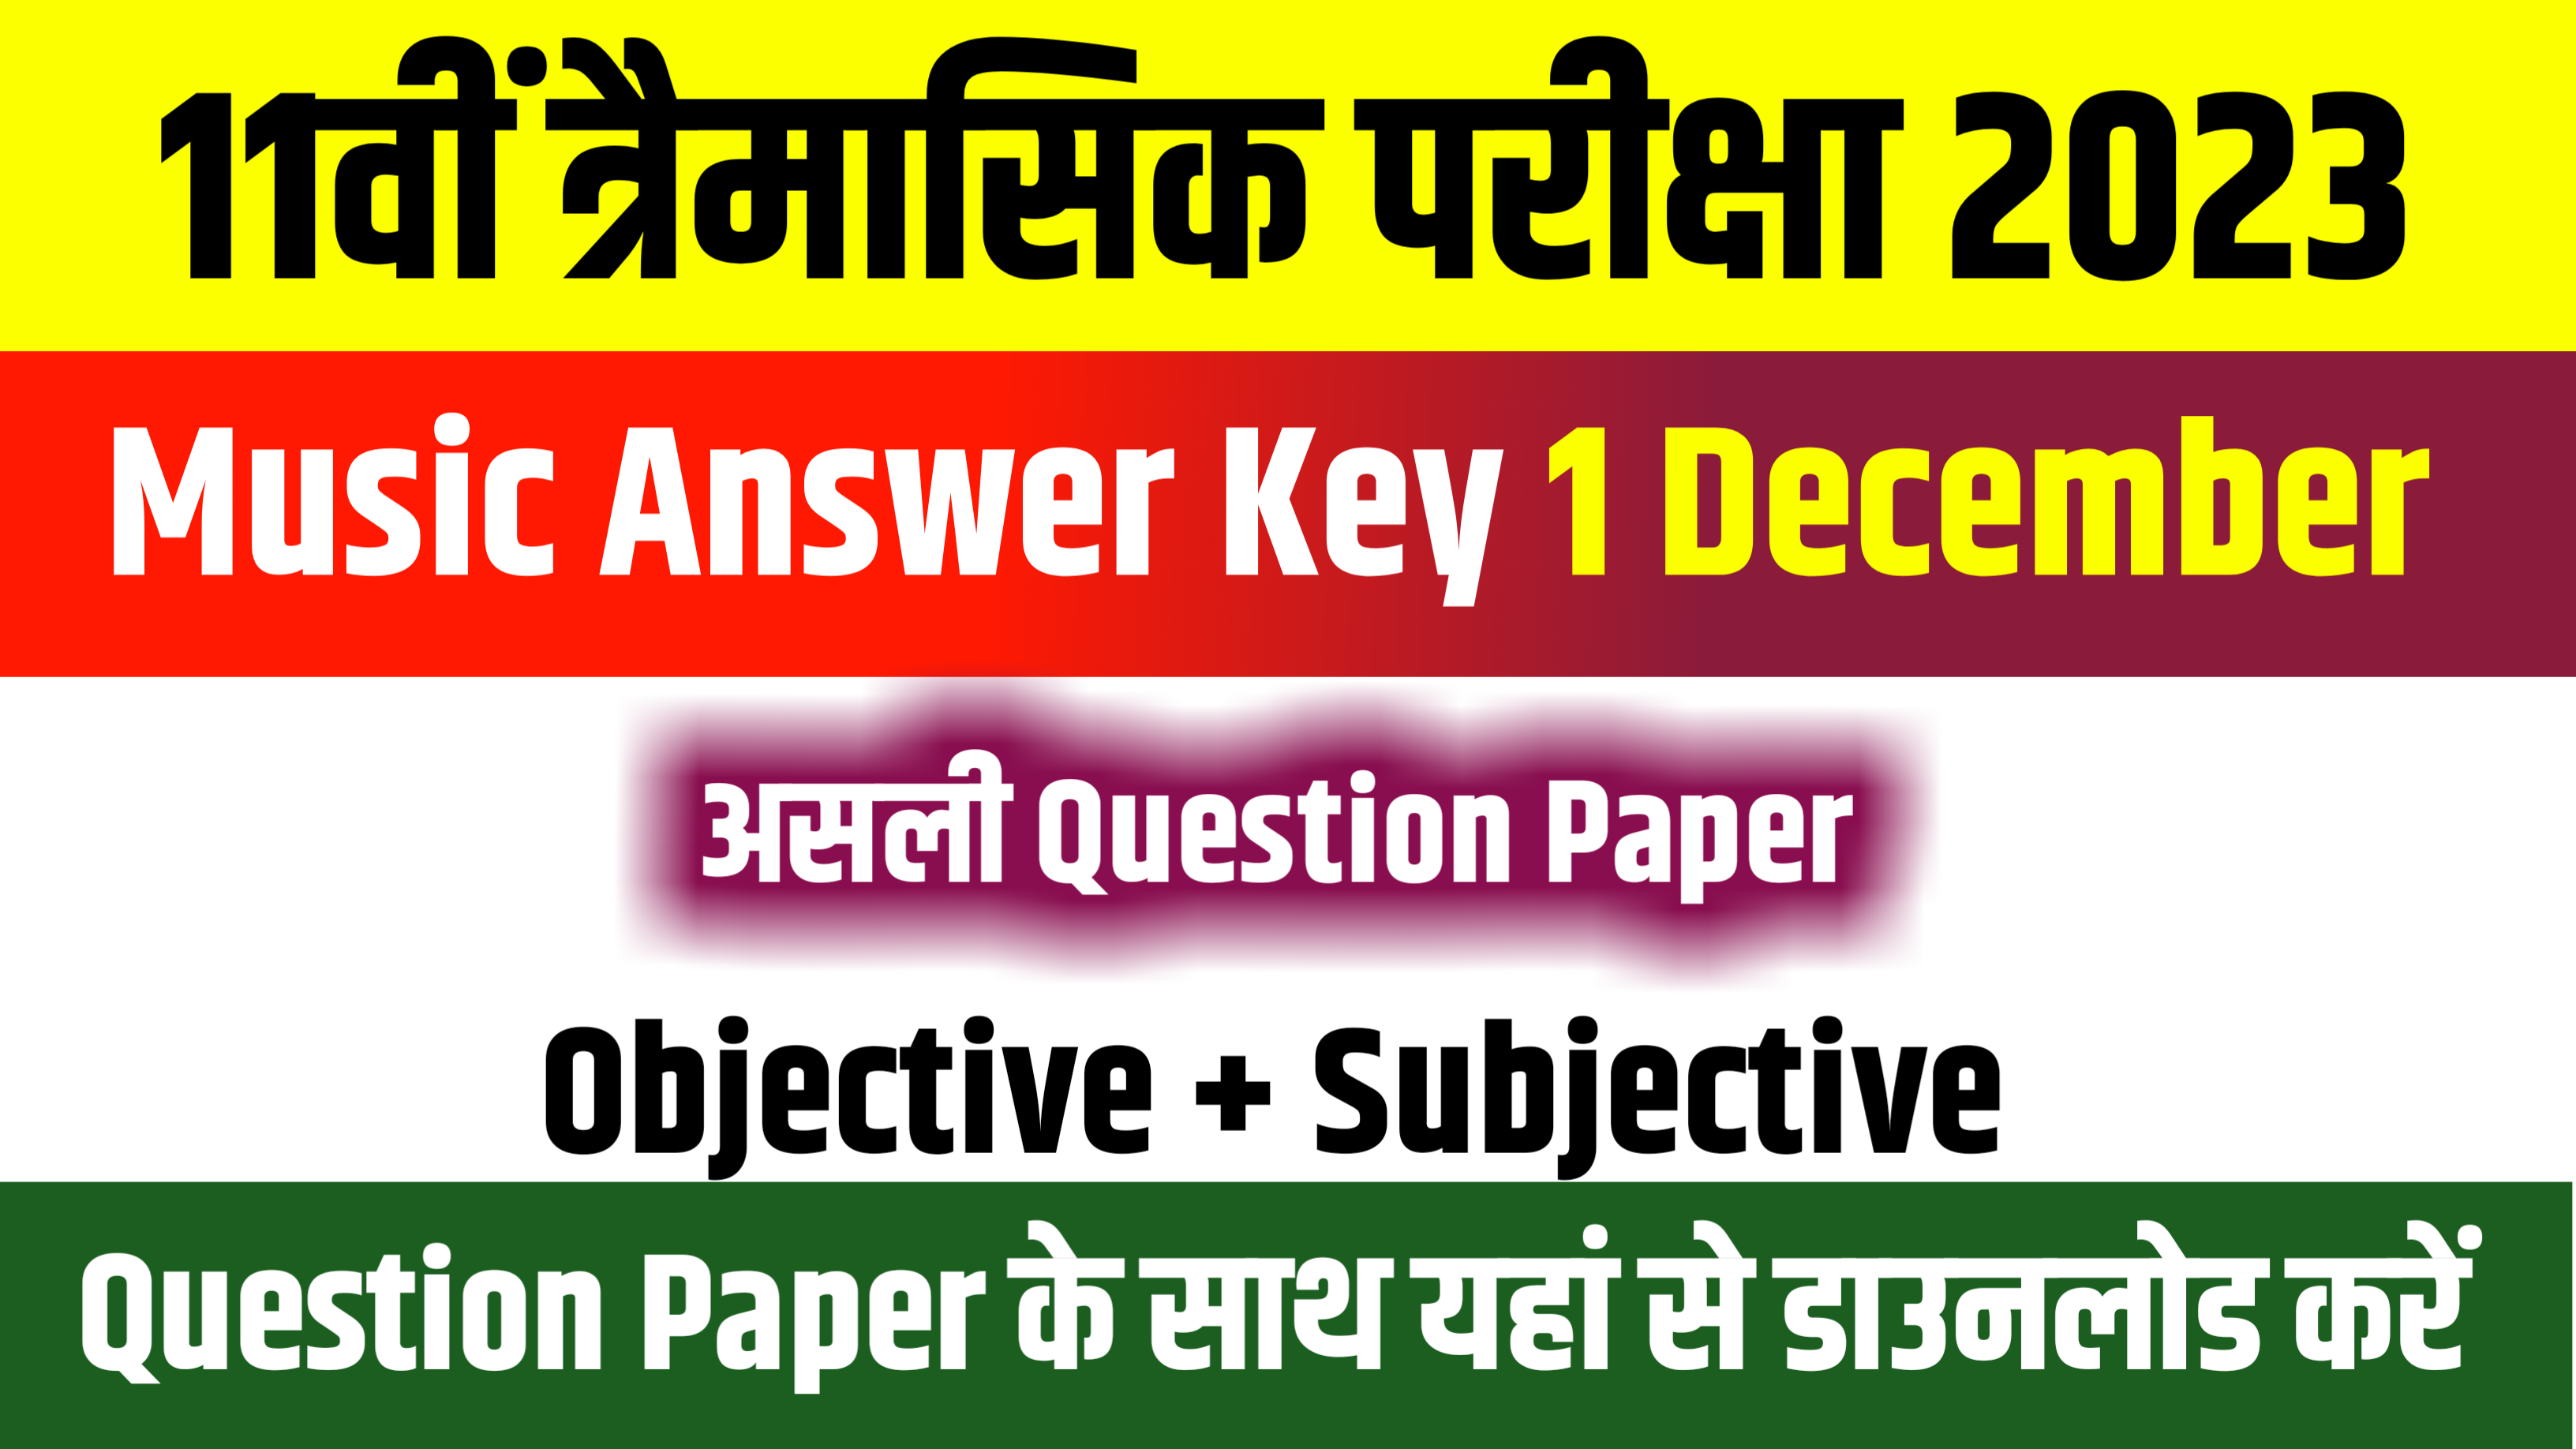 11th Music Objective Subjective 1 December Answer Key: